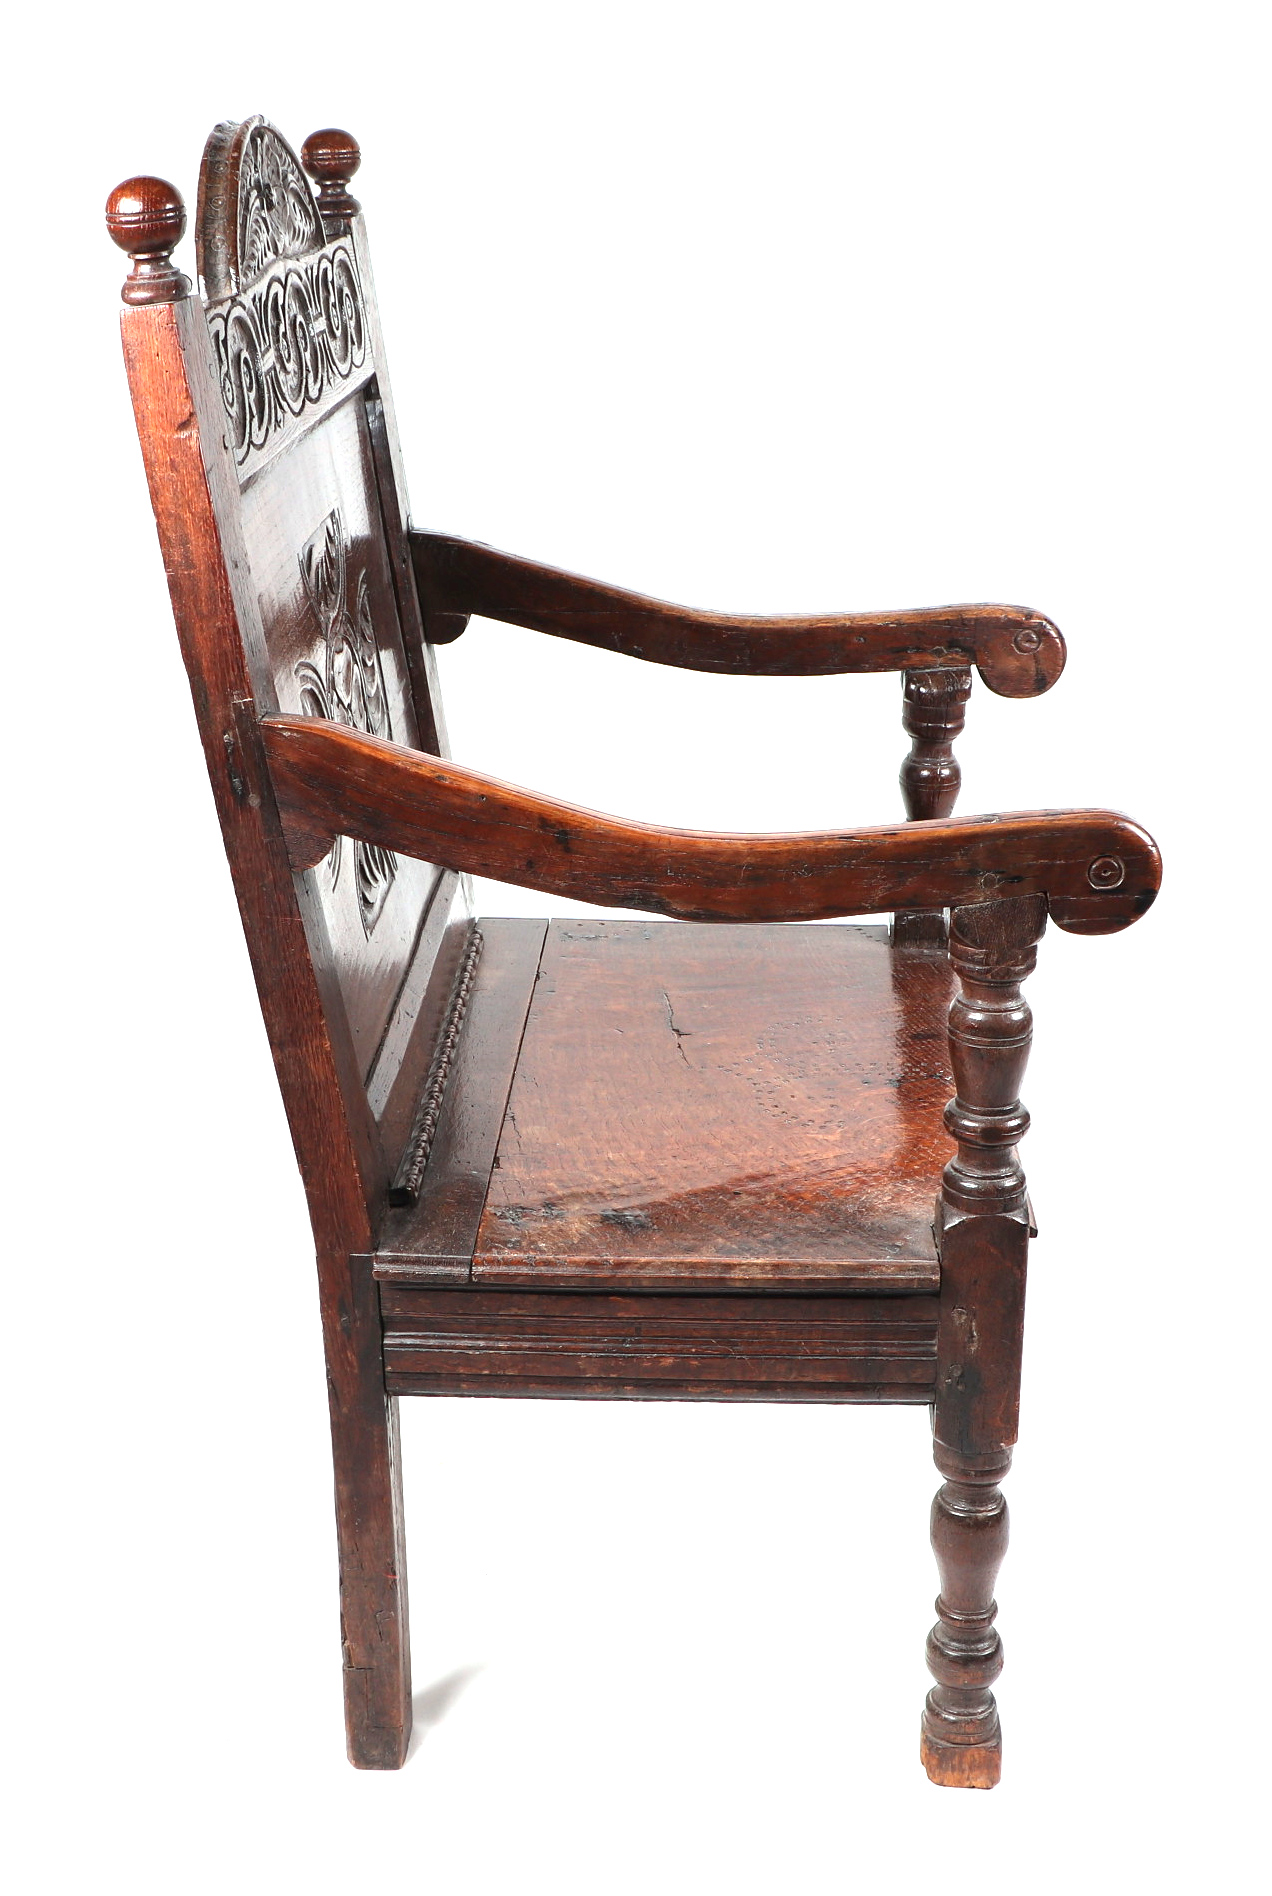 An 18th century style Wainscot type oak chair. - Image 3 of 8